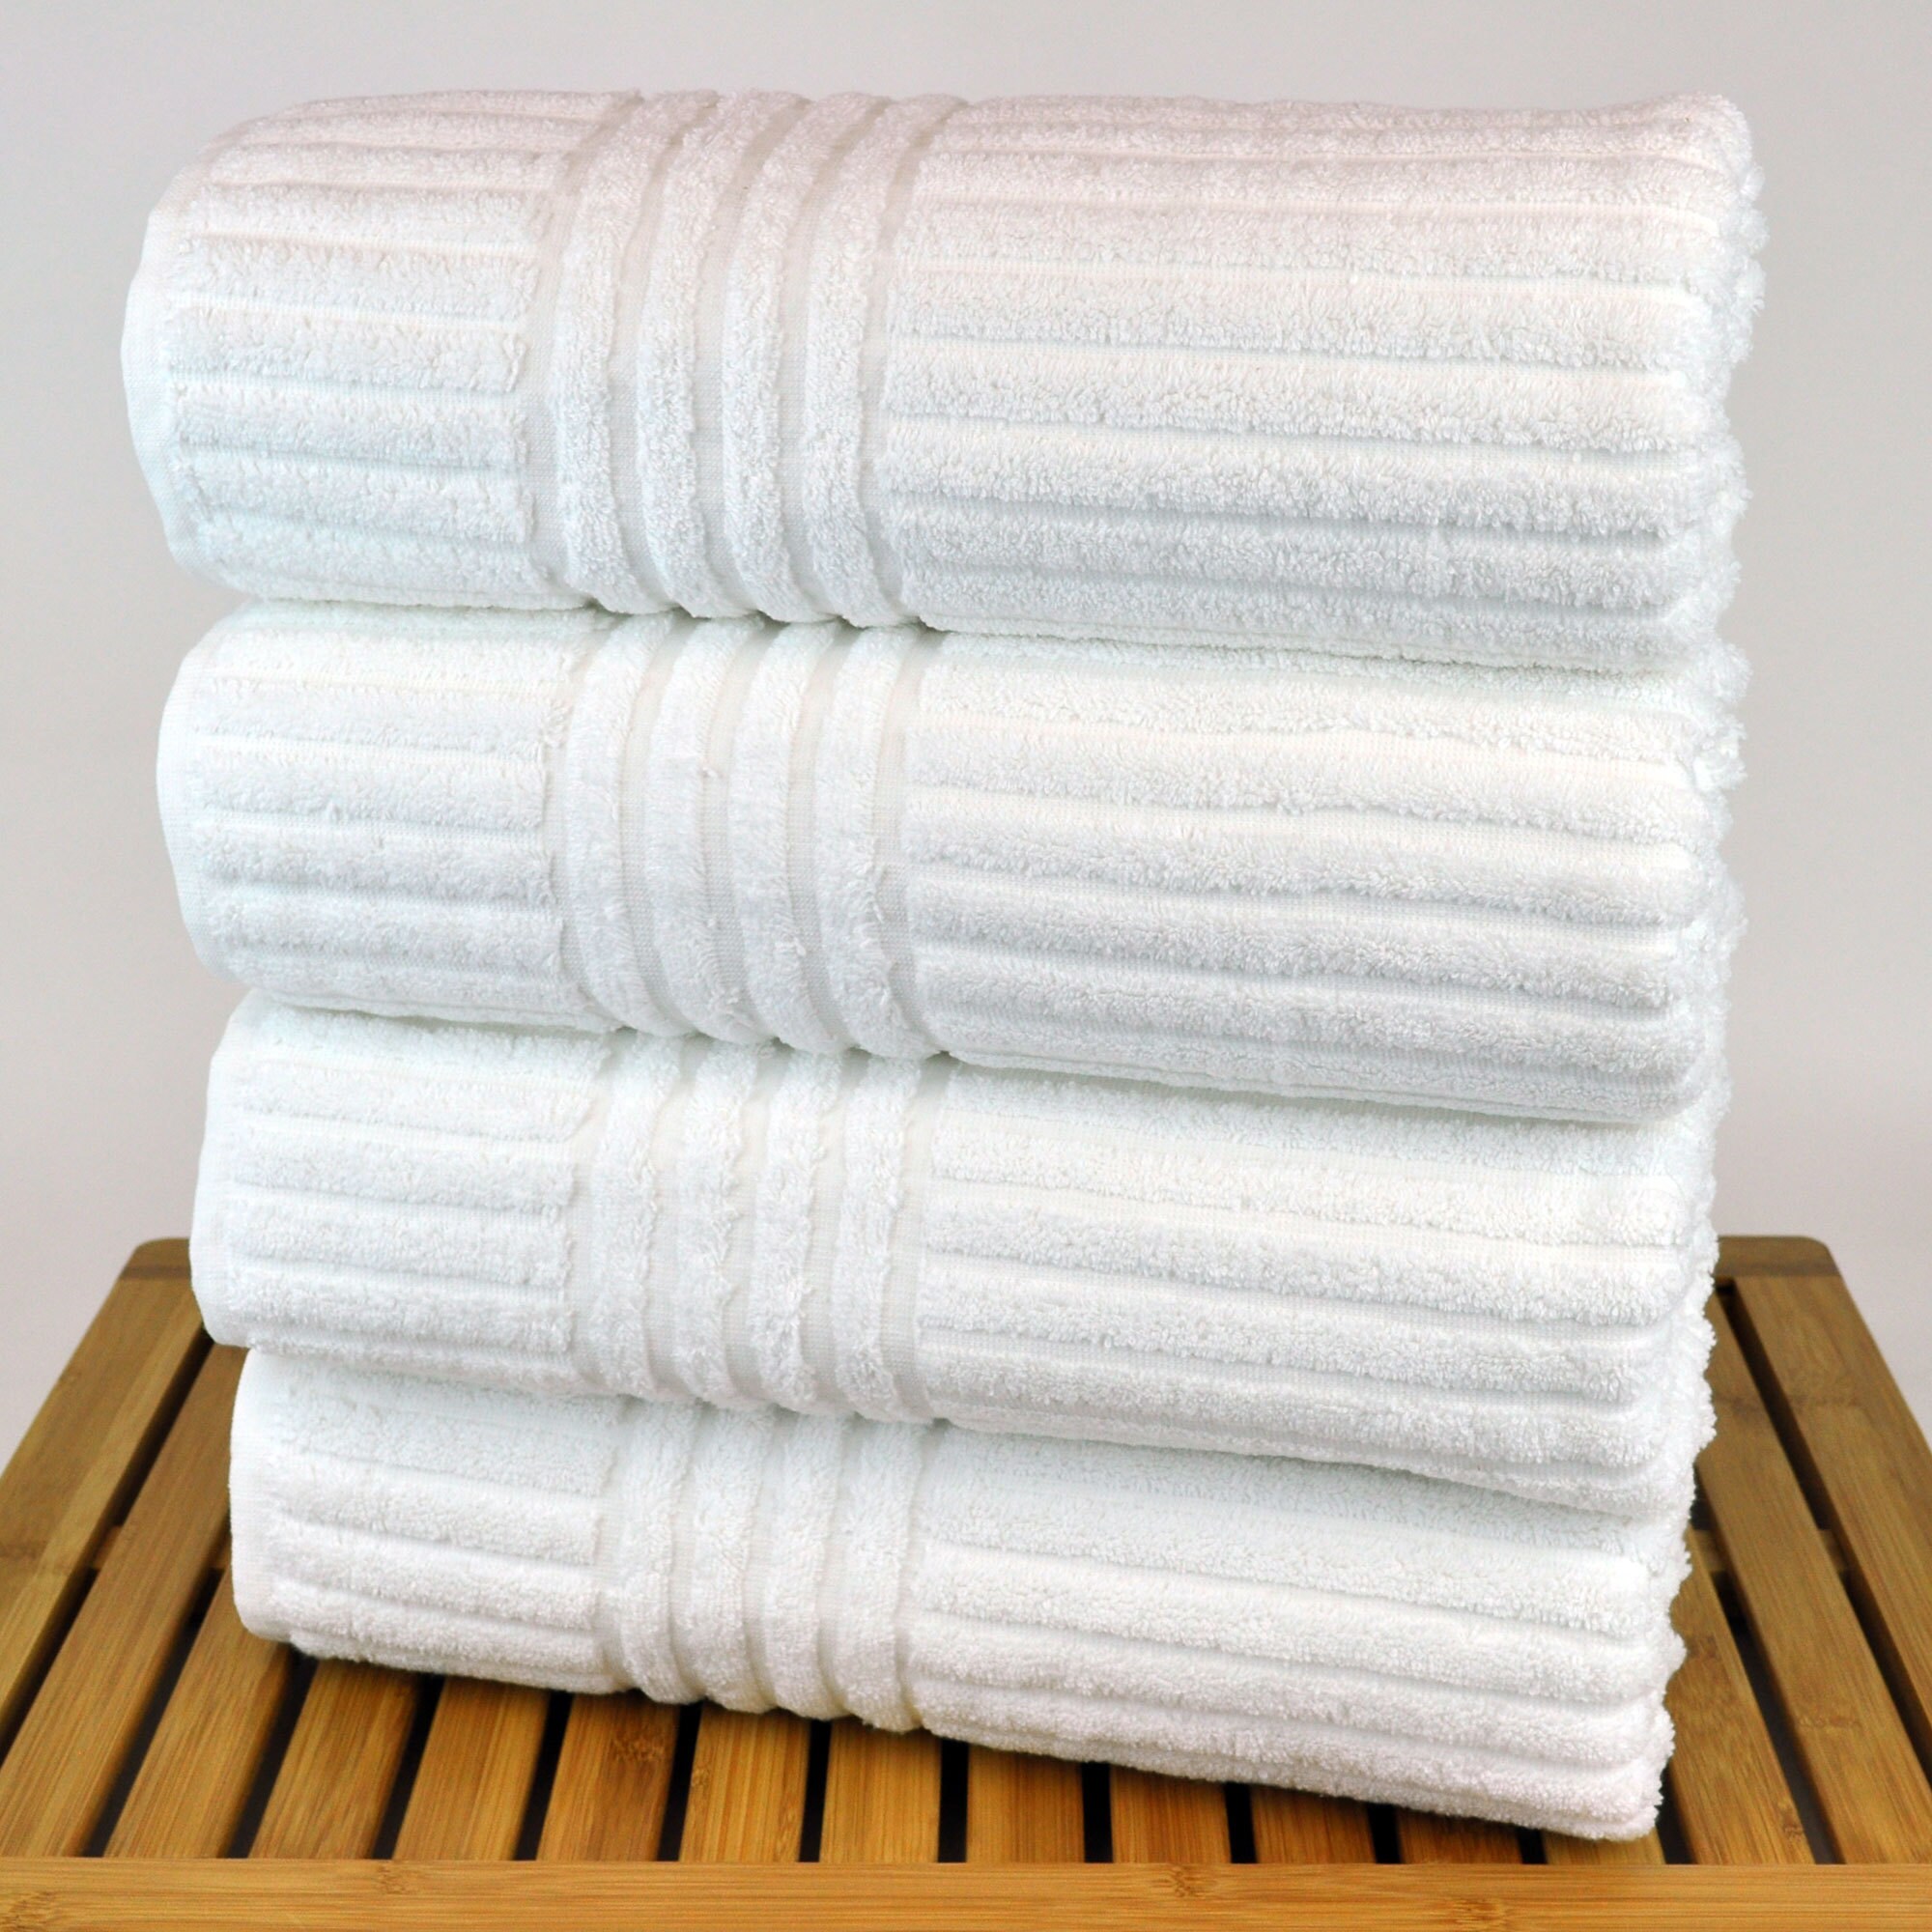 https://ak1.ostkcdn.com/images/products/10102608/Luxury-Hotel-and-Spa-Towel-100-percent-Genuine-Turkish-Cotton-Bath-Towels-Striped-Set-of-4-f88827a3-82d5-4b7a-908a-0e4c2a35e2e9.jpg